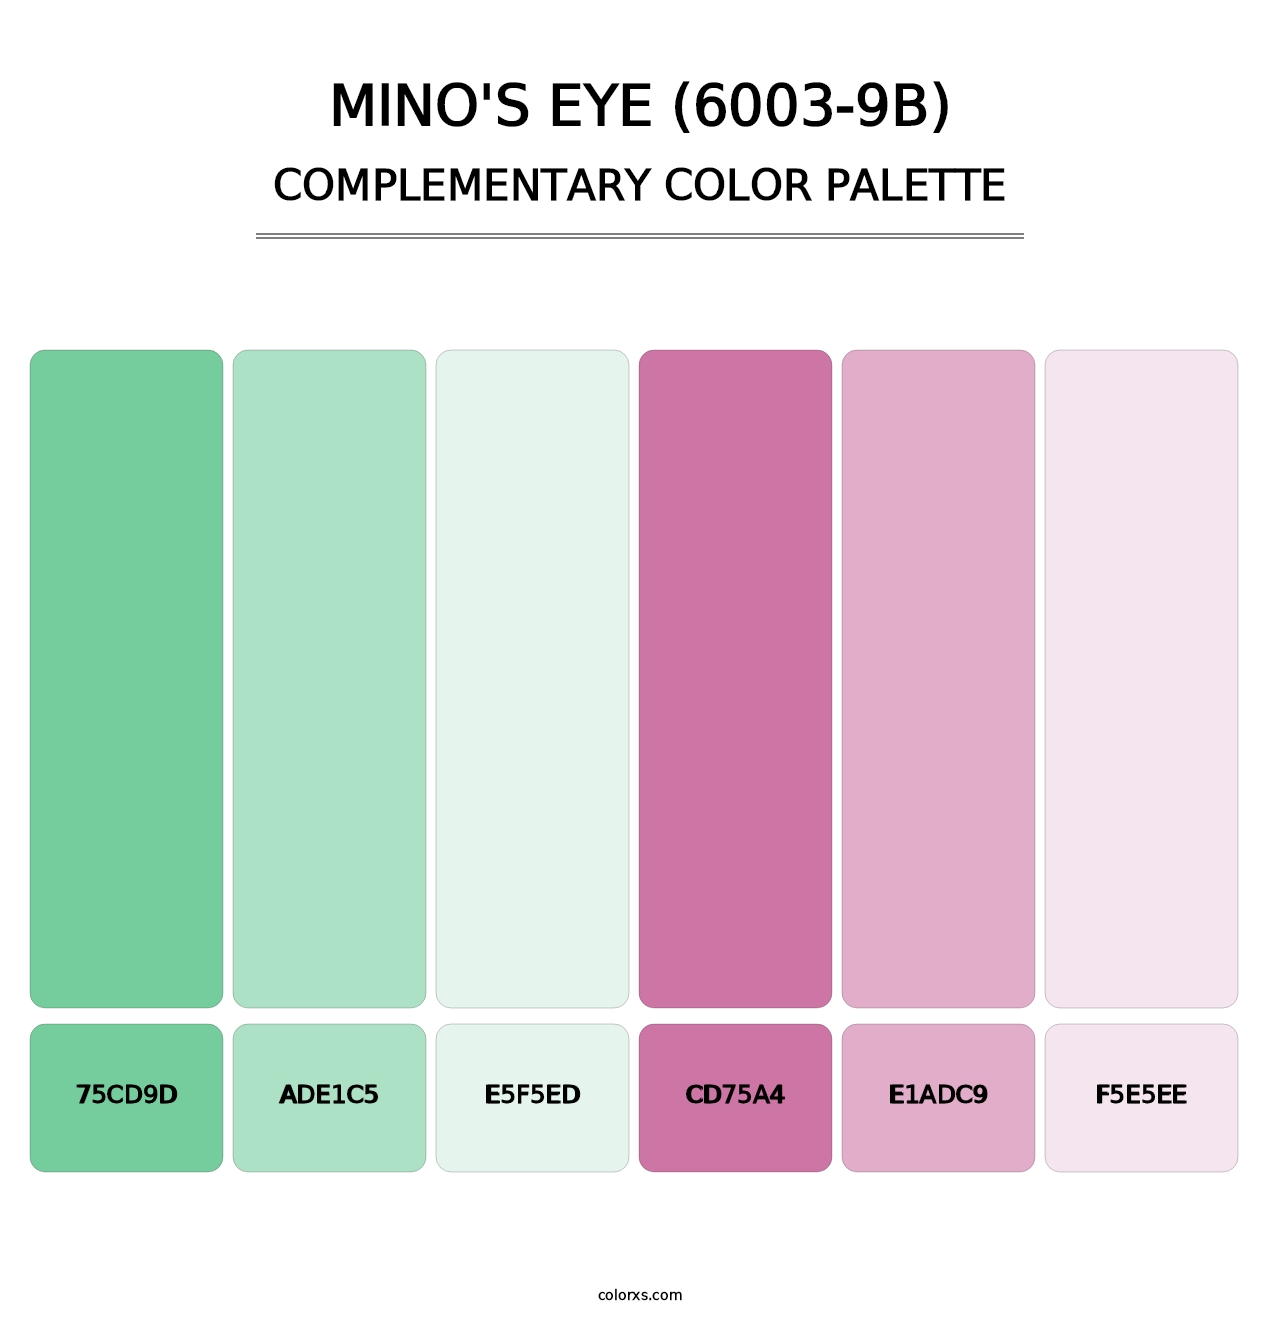 Mino's Eye (6003-9B) - Complementary Color Palette